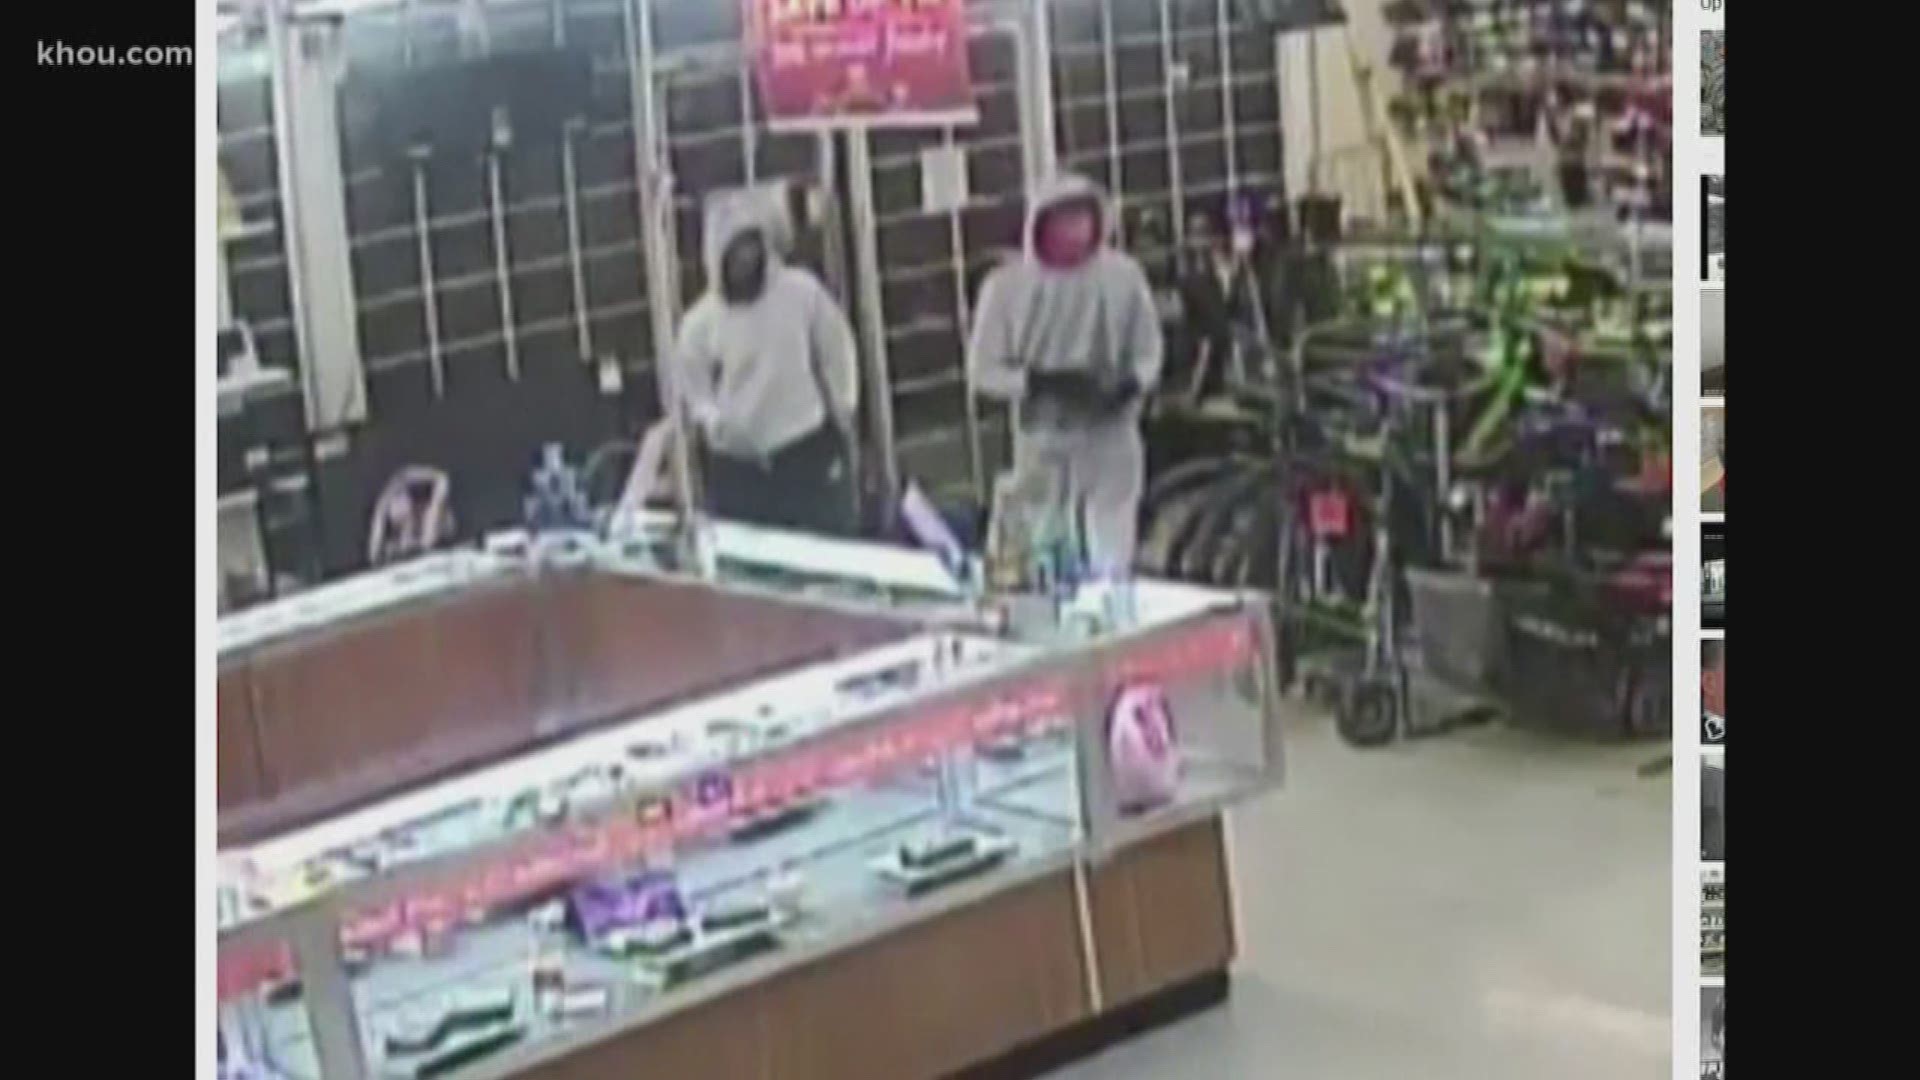 New video shows two robbery suspects storm into a pawn shop in southwest Houston. One of the suspects fatally shot a man who tried to stop them.